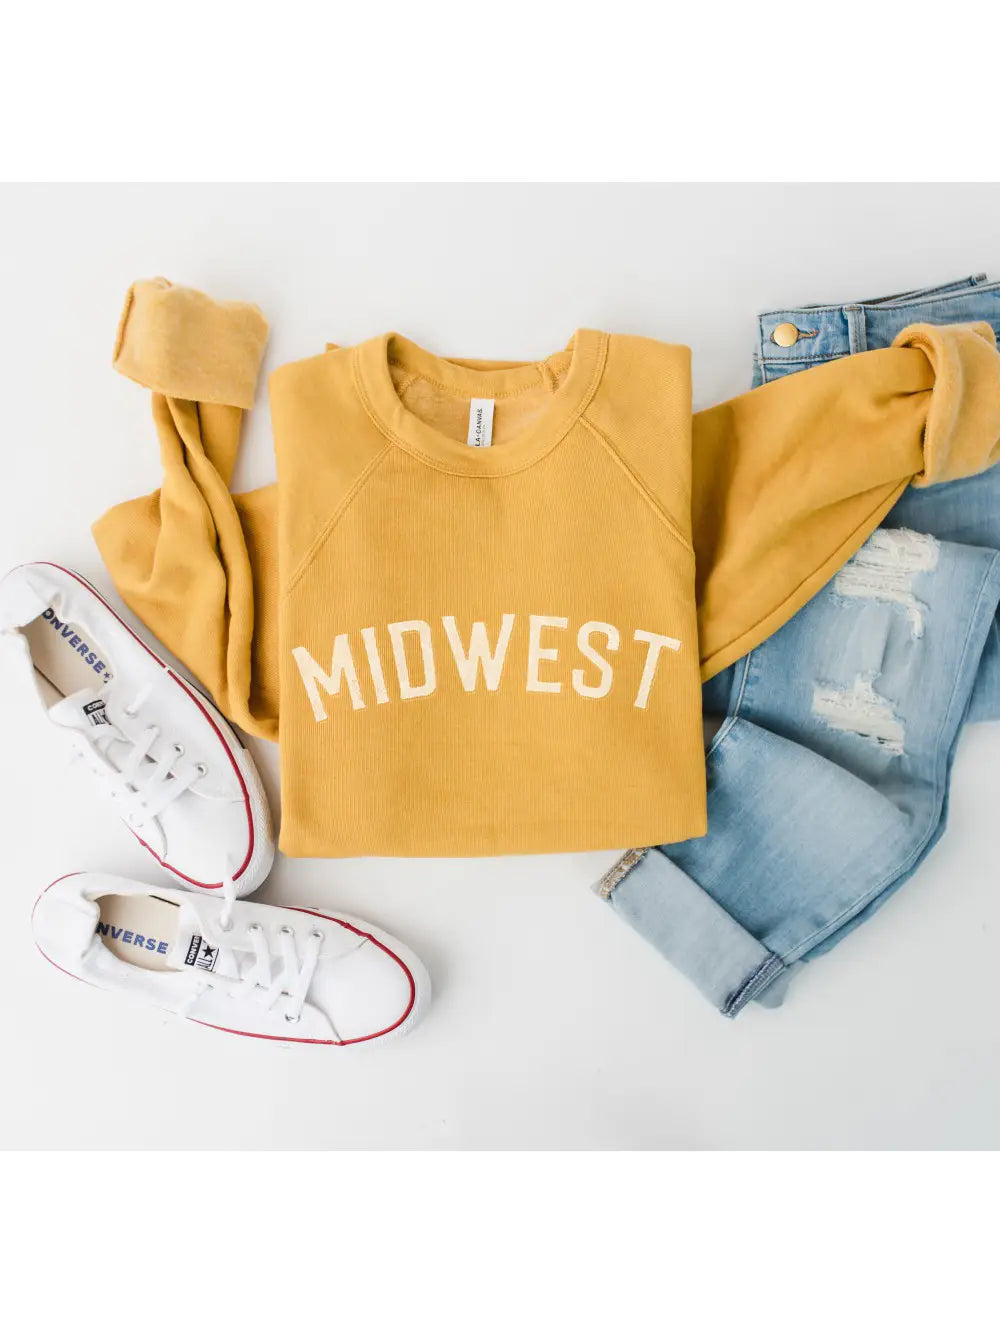 Midwest Sweater